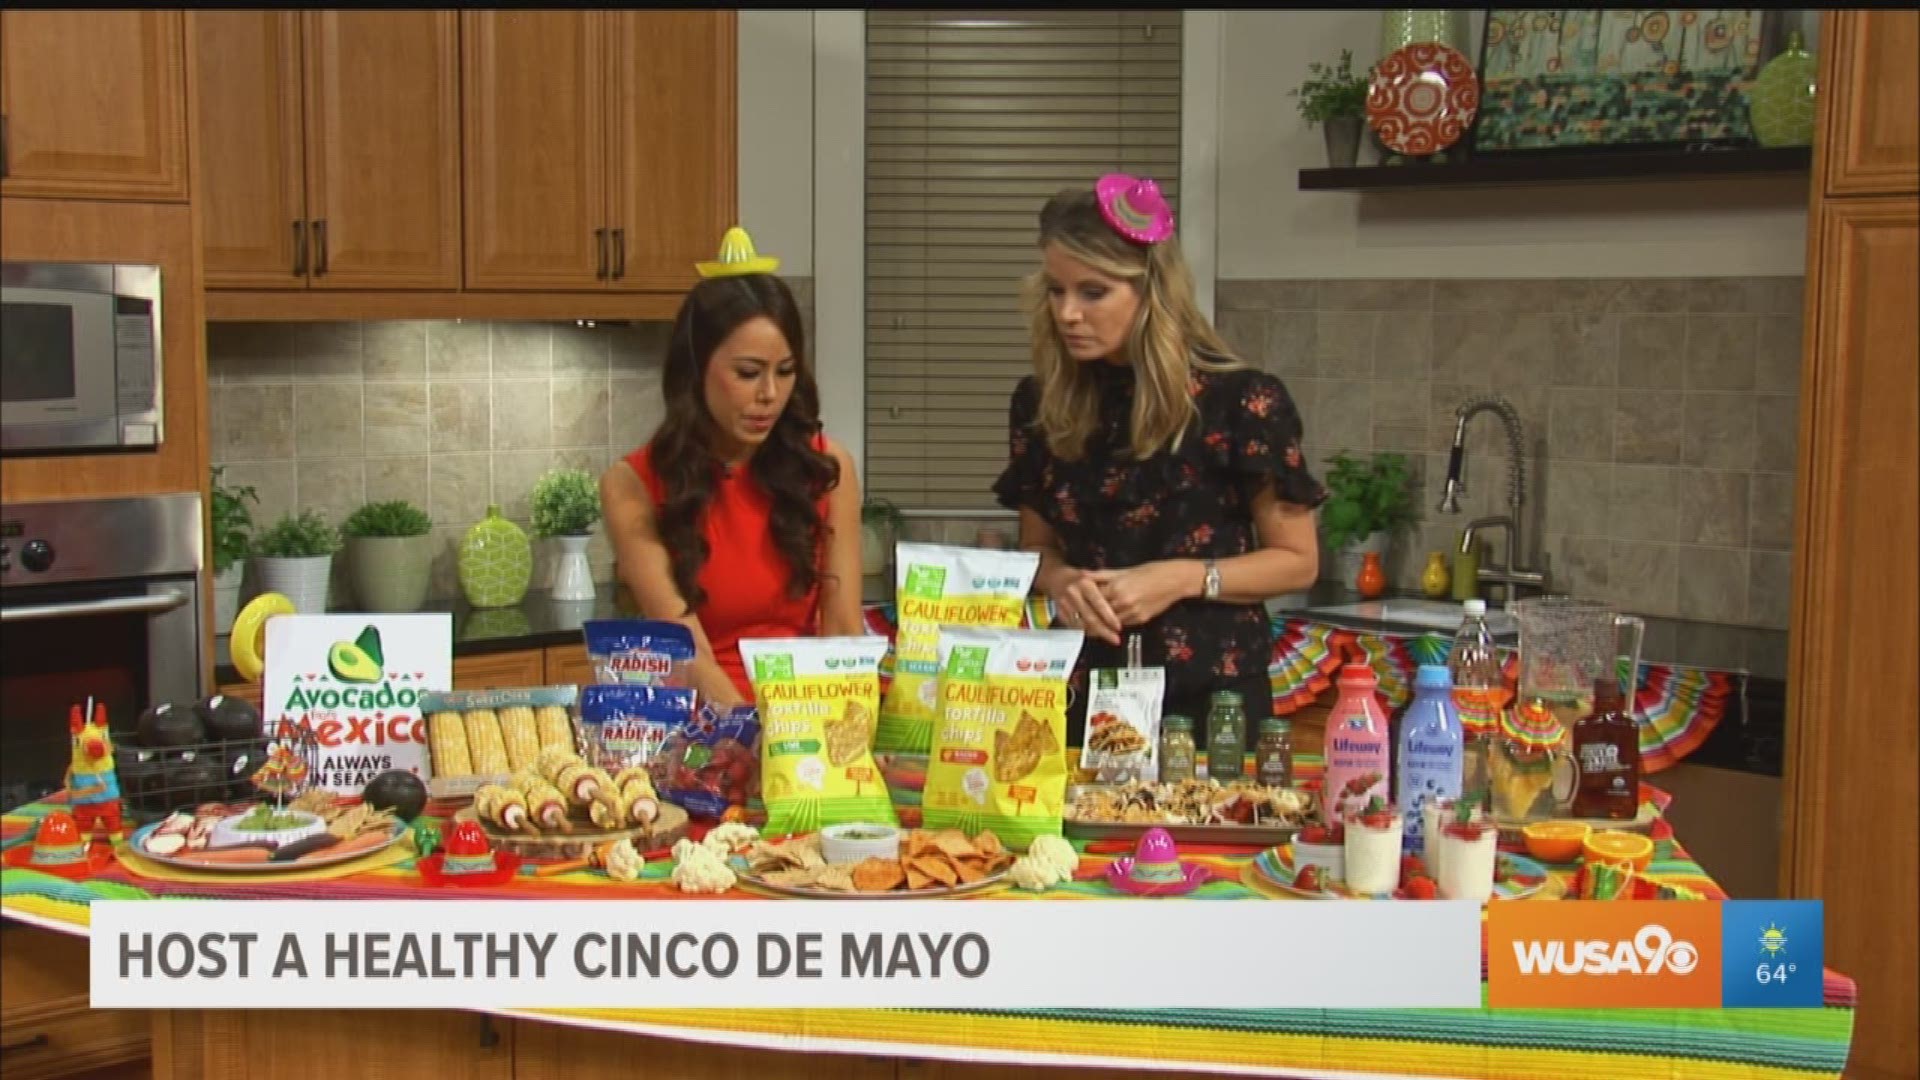 Registered Dietitian Mia Syn from Nutrition By Mia, shares tips and recipes to make your Cinco de Mayo both healthy and delicious.  For recipe ideas an more information about healthy foods and diet visit www.nutritionbymia.com and you can follow Mia on Instagram @nutritionbymia